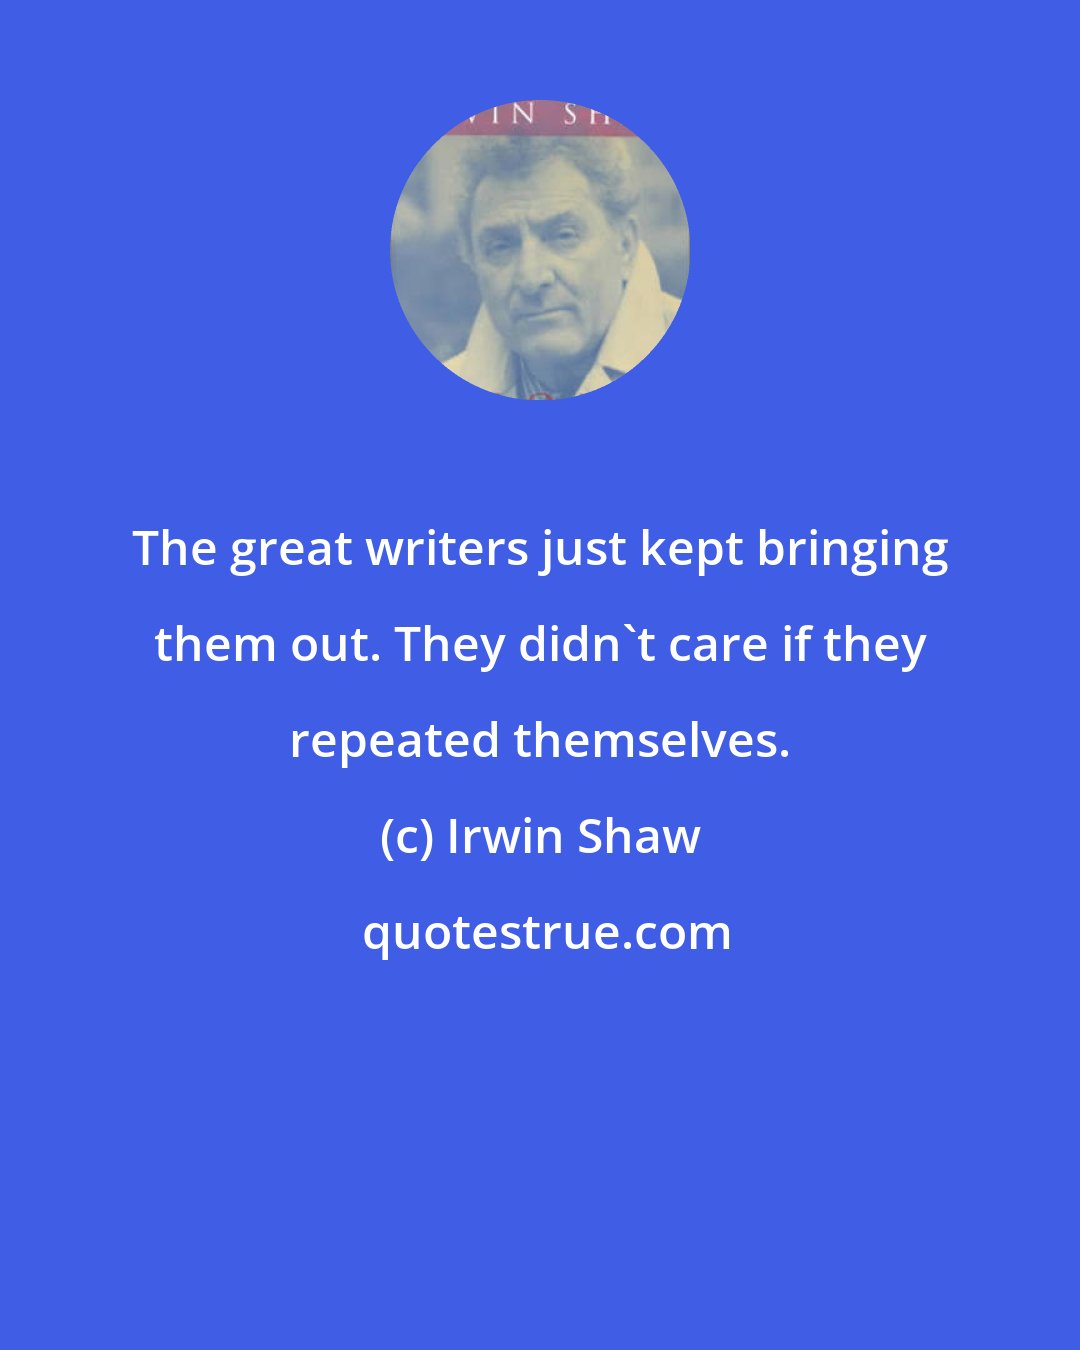 Irwin Shaw: The great writers just kept bringing them out. They didn't care if they repeated themselves.